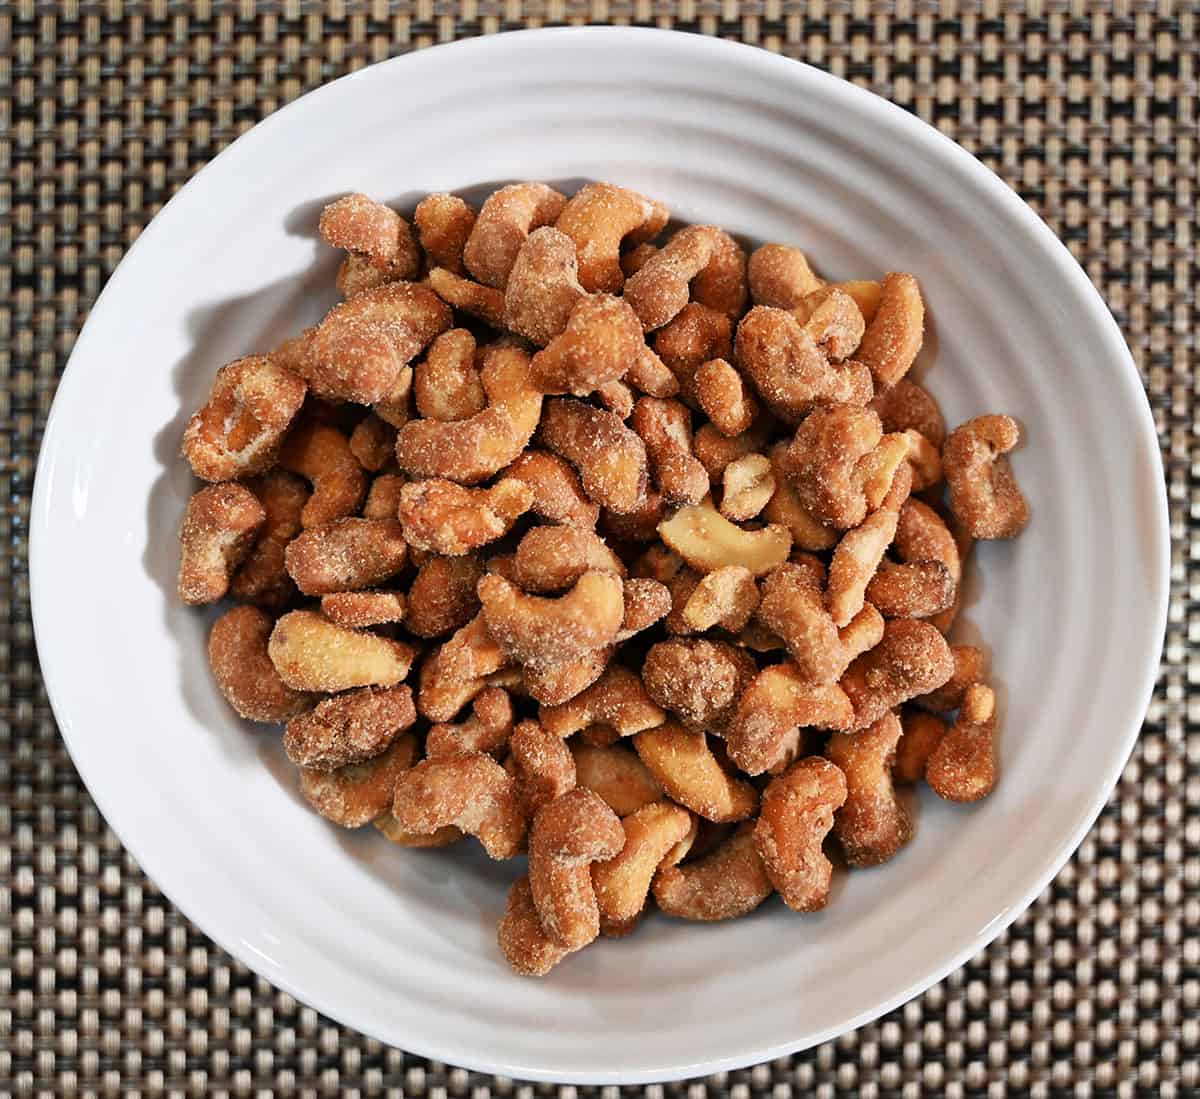 Top down image of a bowl full of cashews.